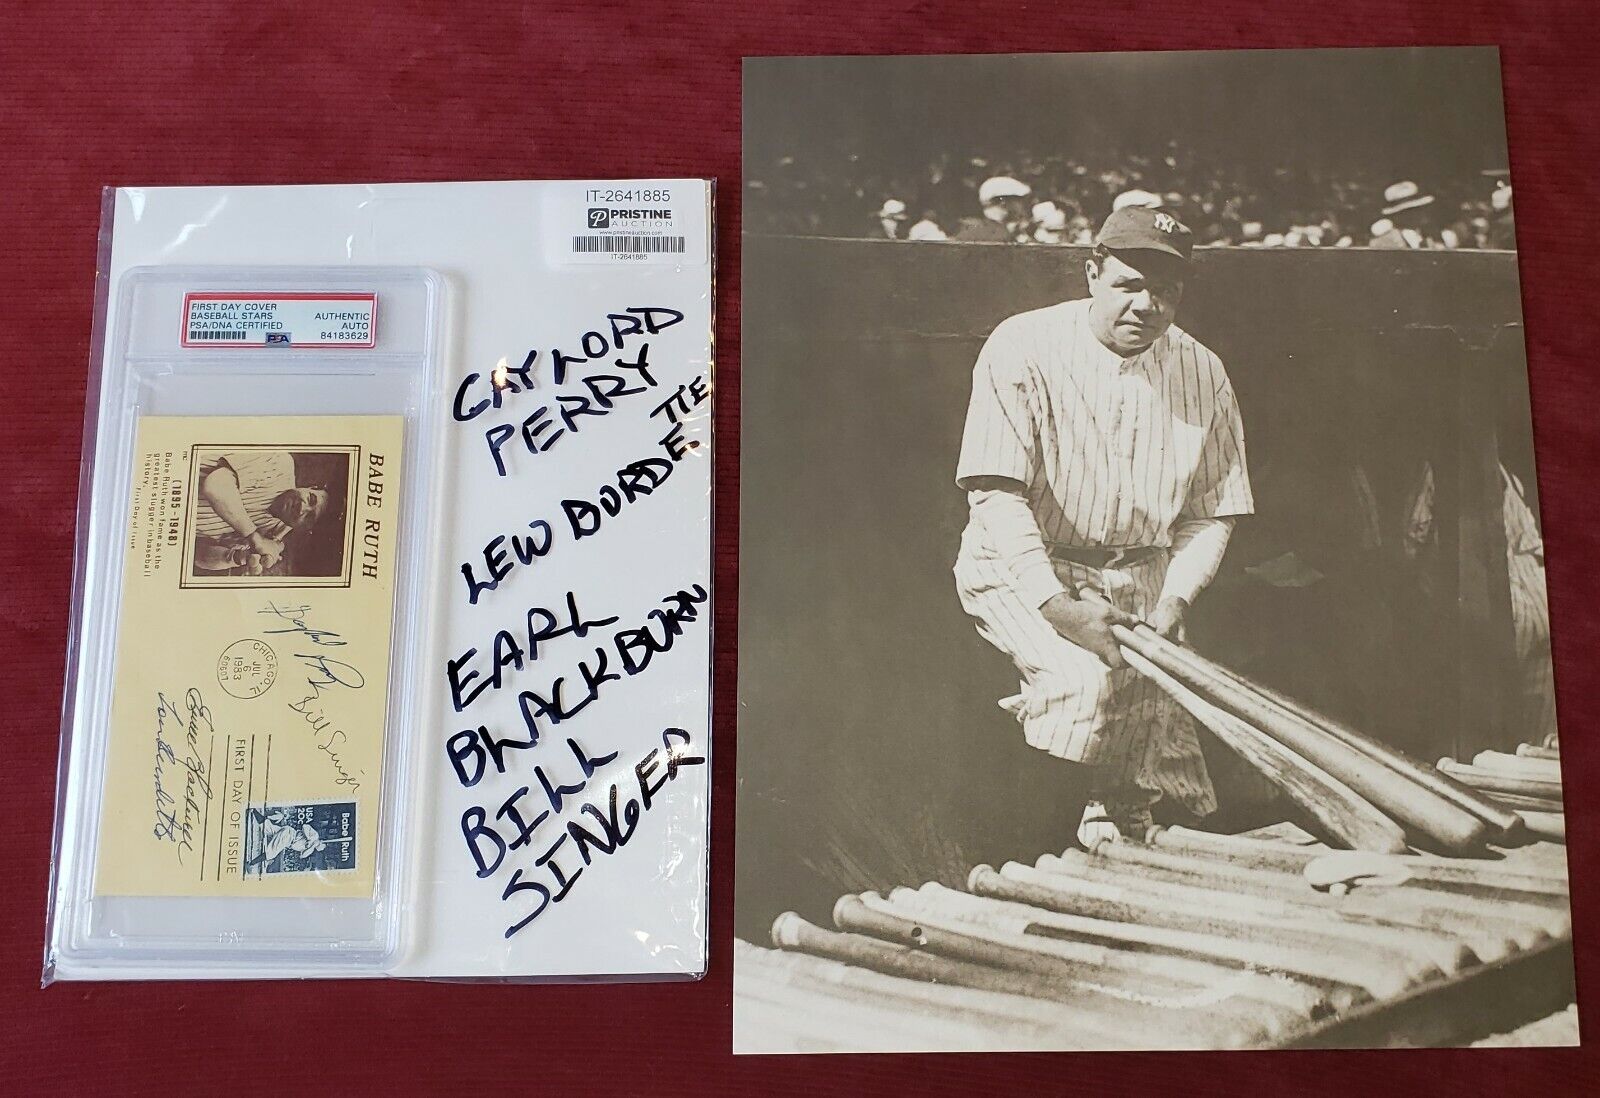 GAYLORD PERRY LEW BURDETTE BILL SINGER PSA/DNA Signed Enca11x14 Babe Ruth Photo Poster painting